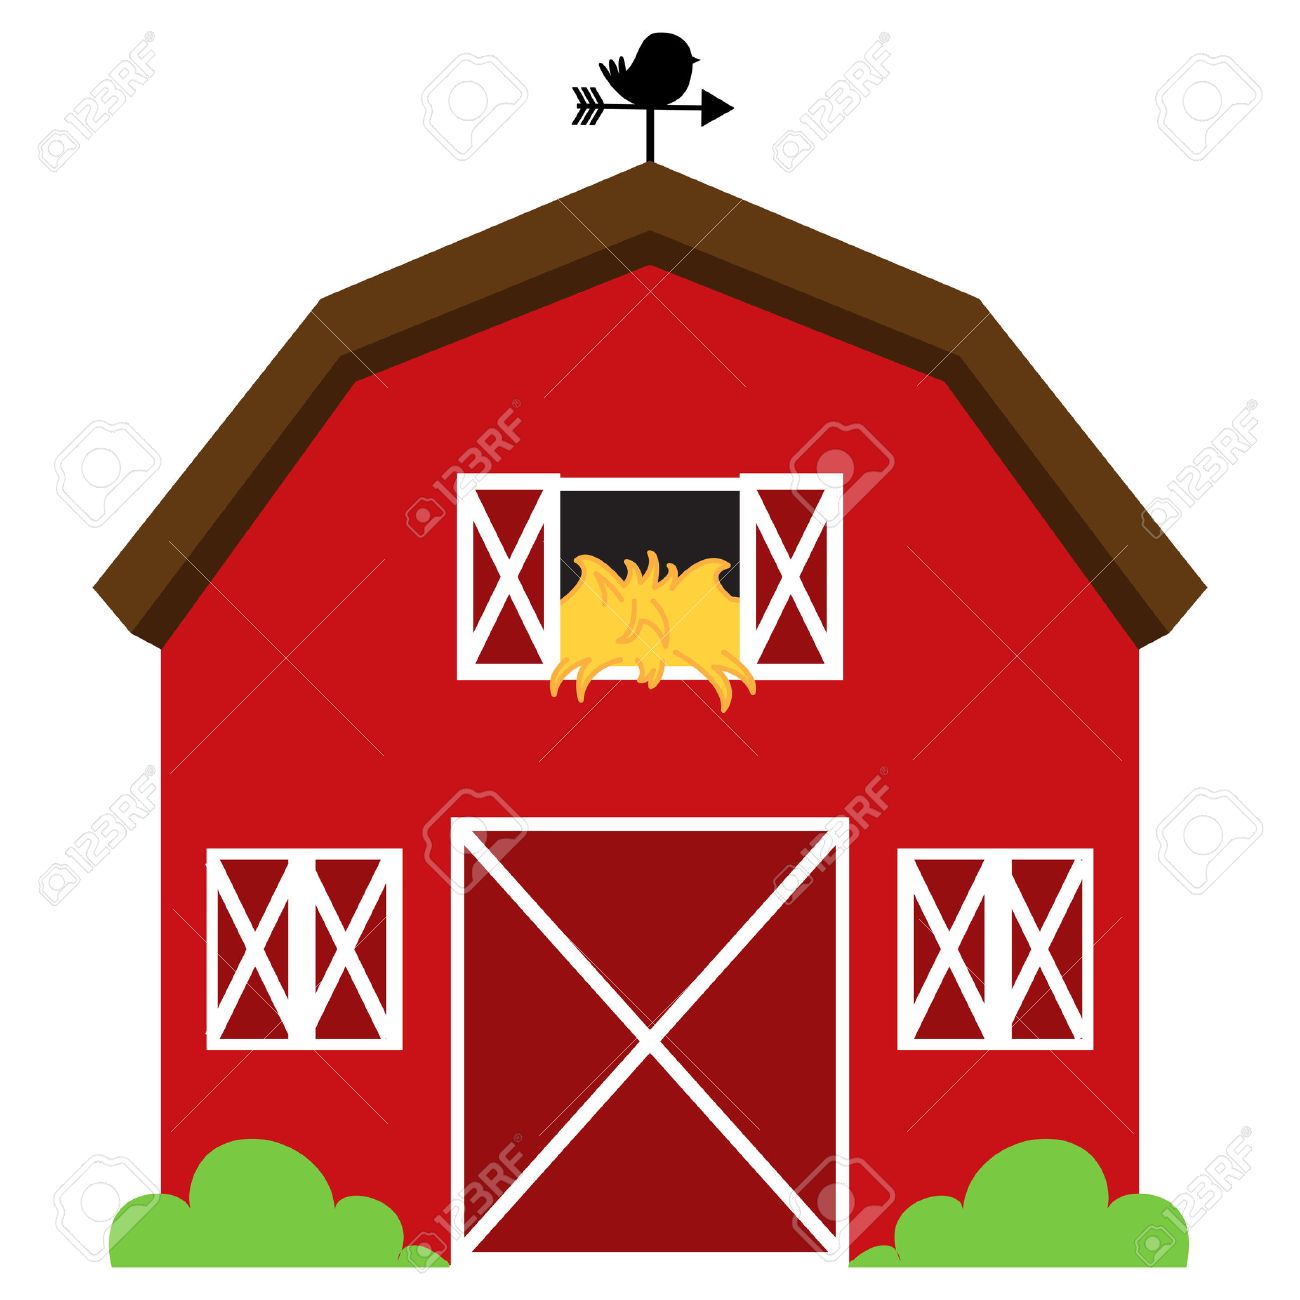 Red Barn Clipart  | Free download